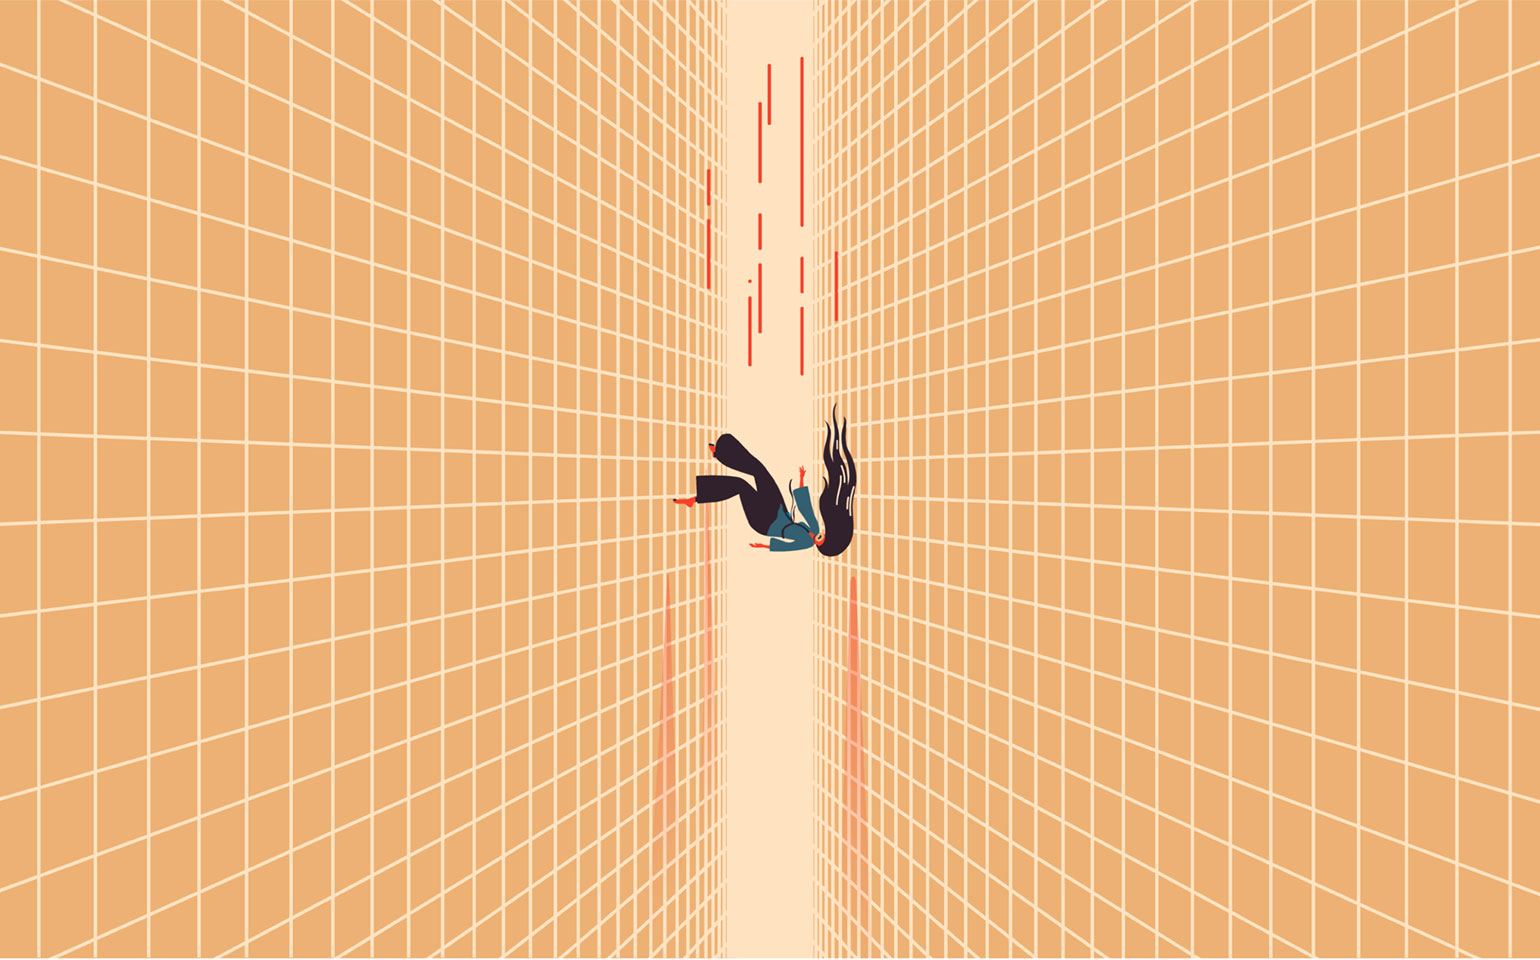 A person is shown falling between two walls to simulate the feeling of generalized anxiety.